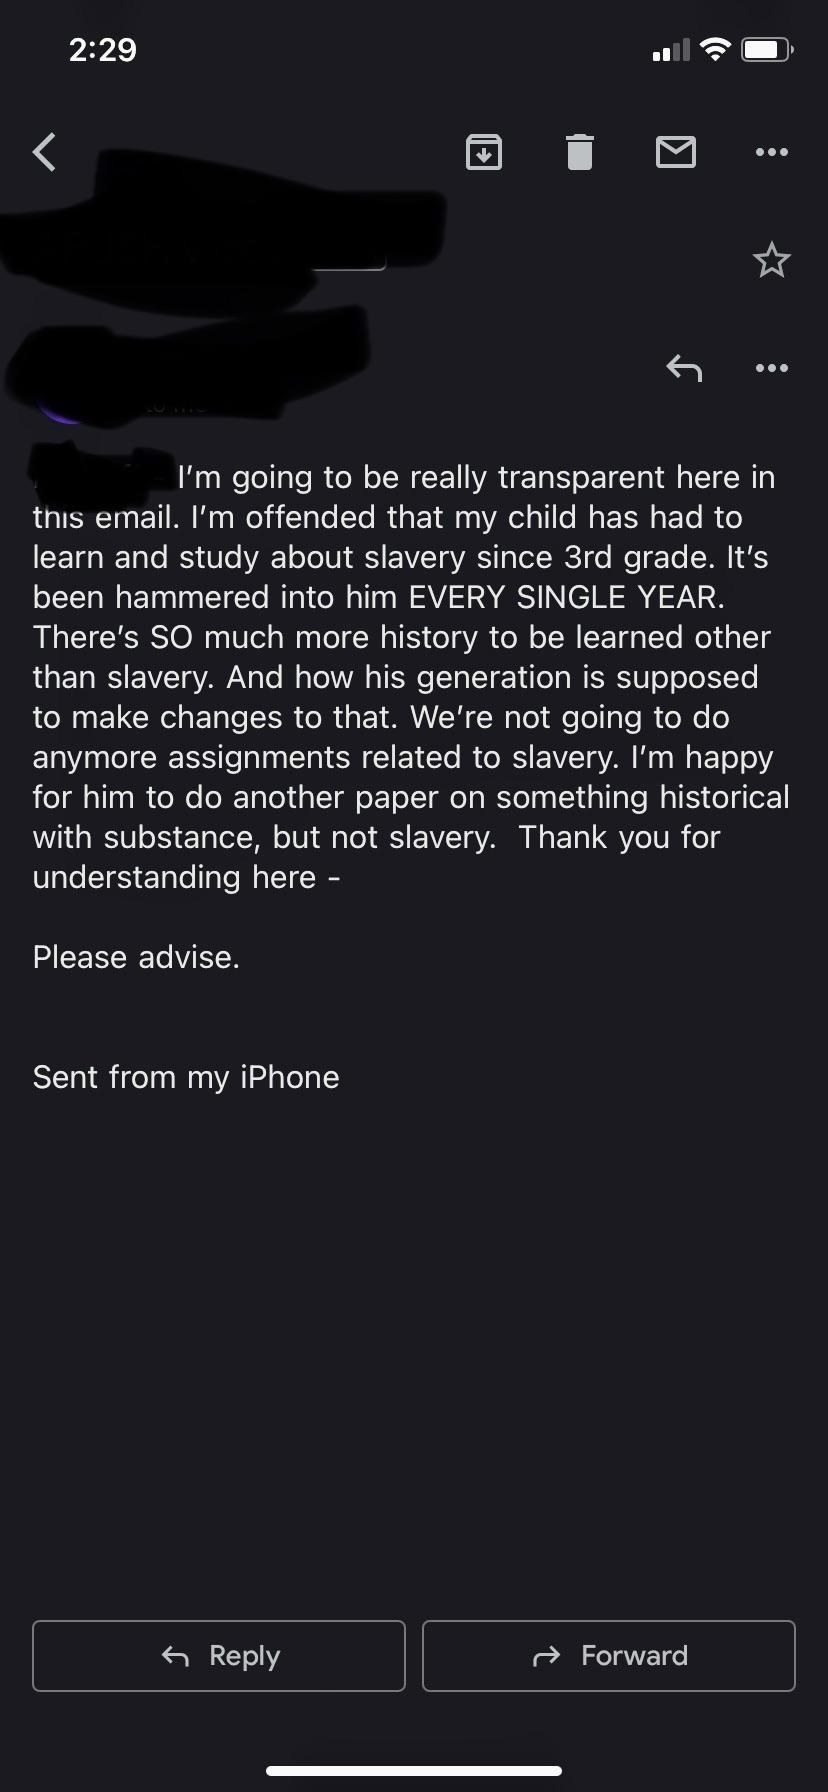 A parent emailing a teacher to tell them they are upset their child is learning about slavery